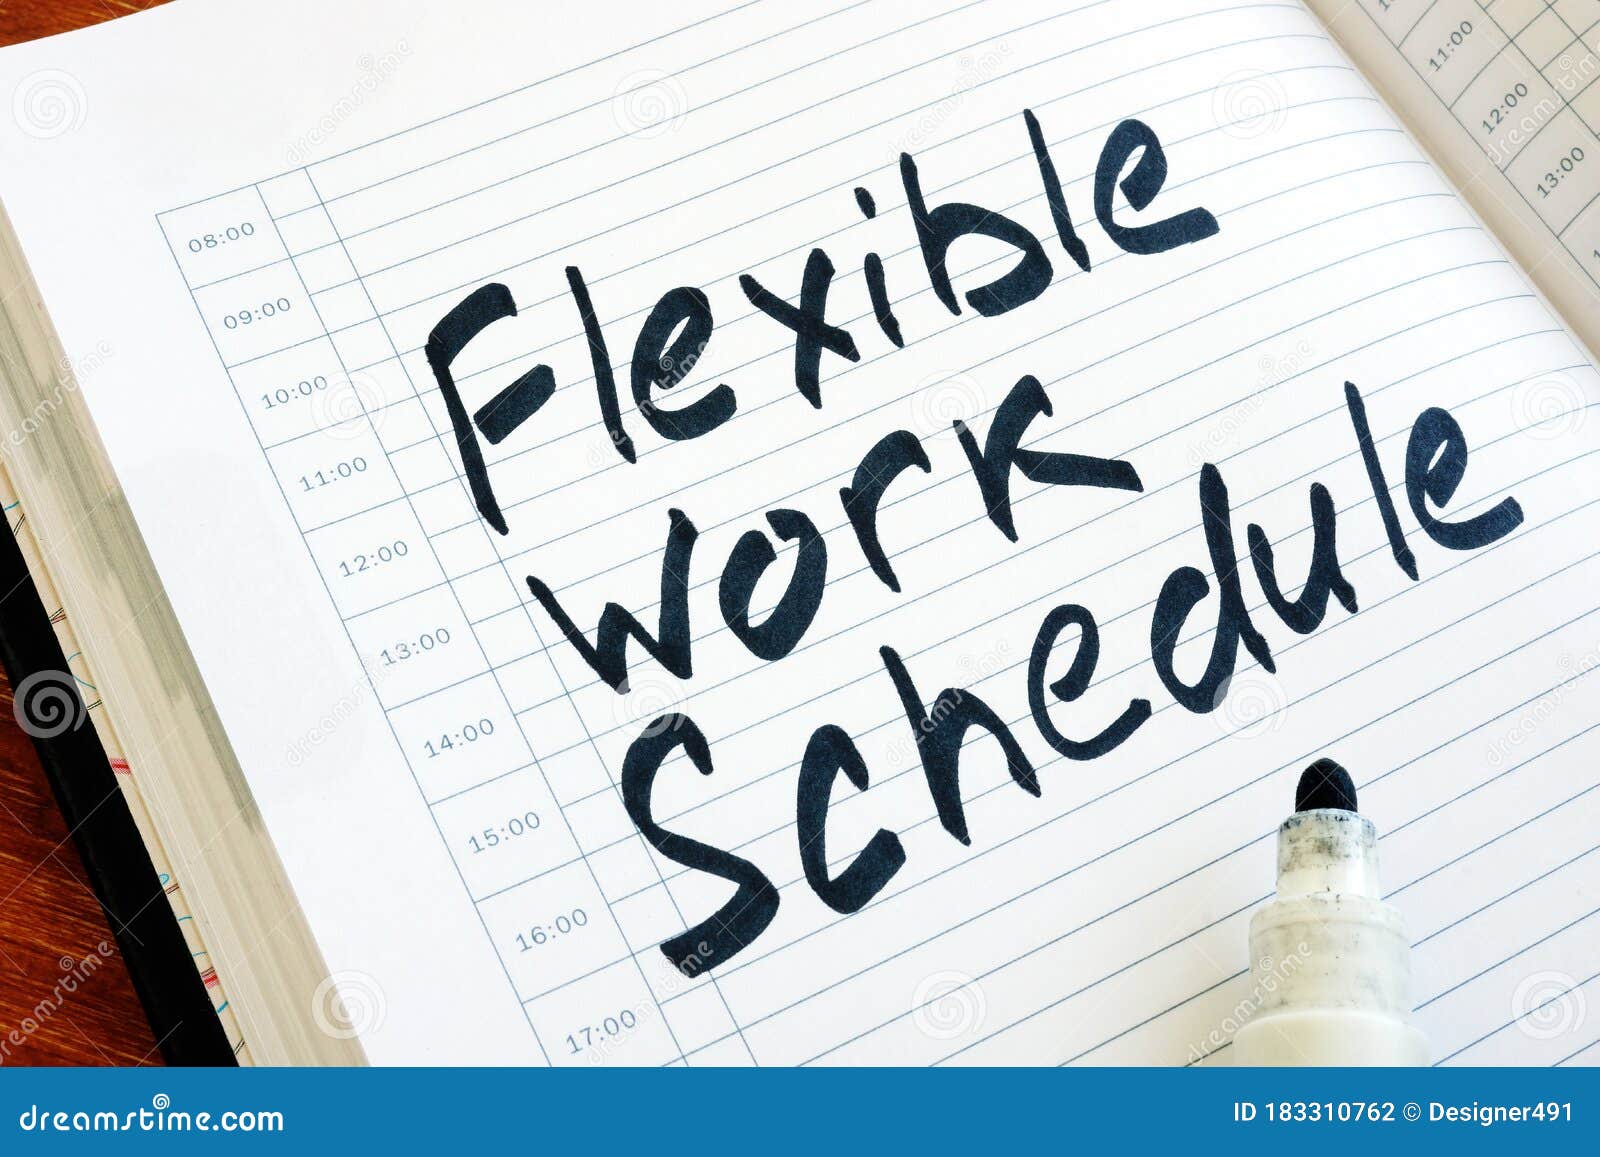 Flexible Work Schedule Sign In The Notepad Stock Photo Image Of